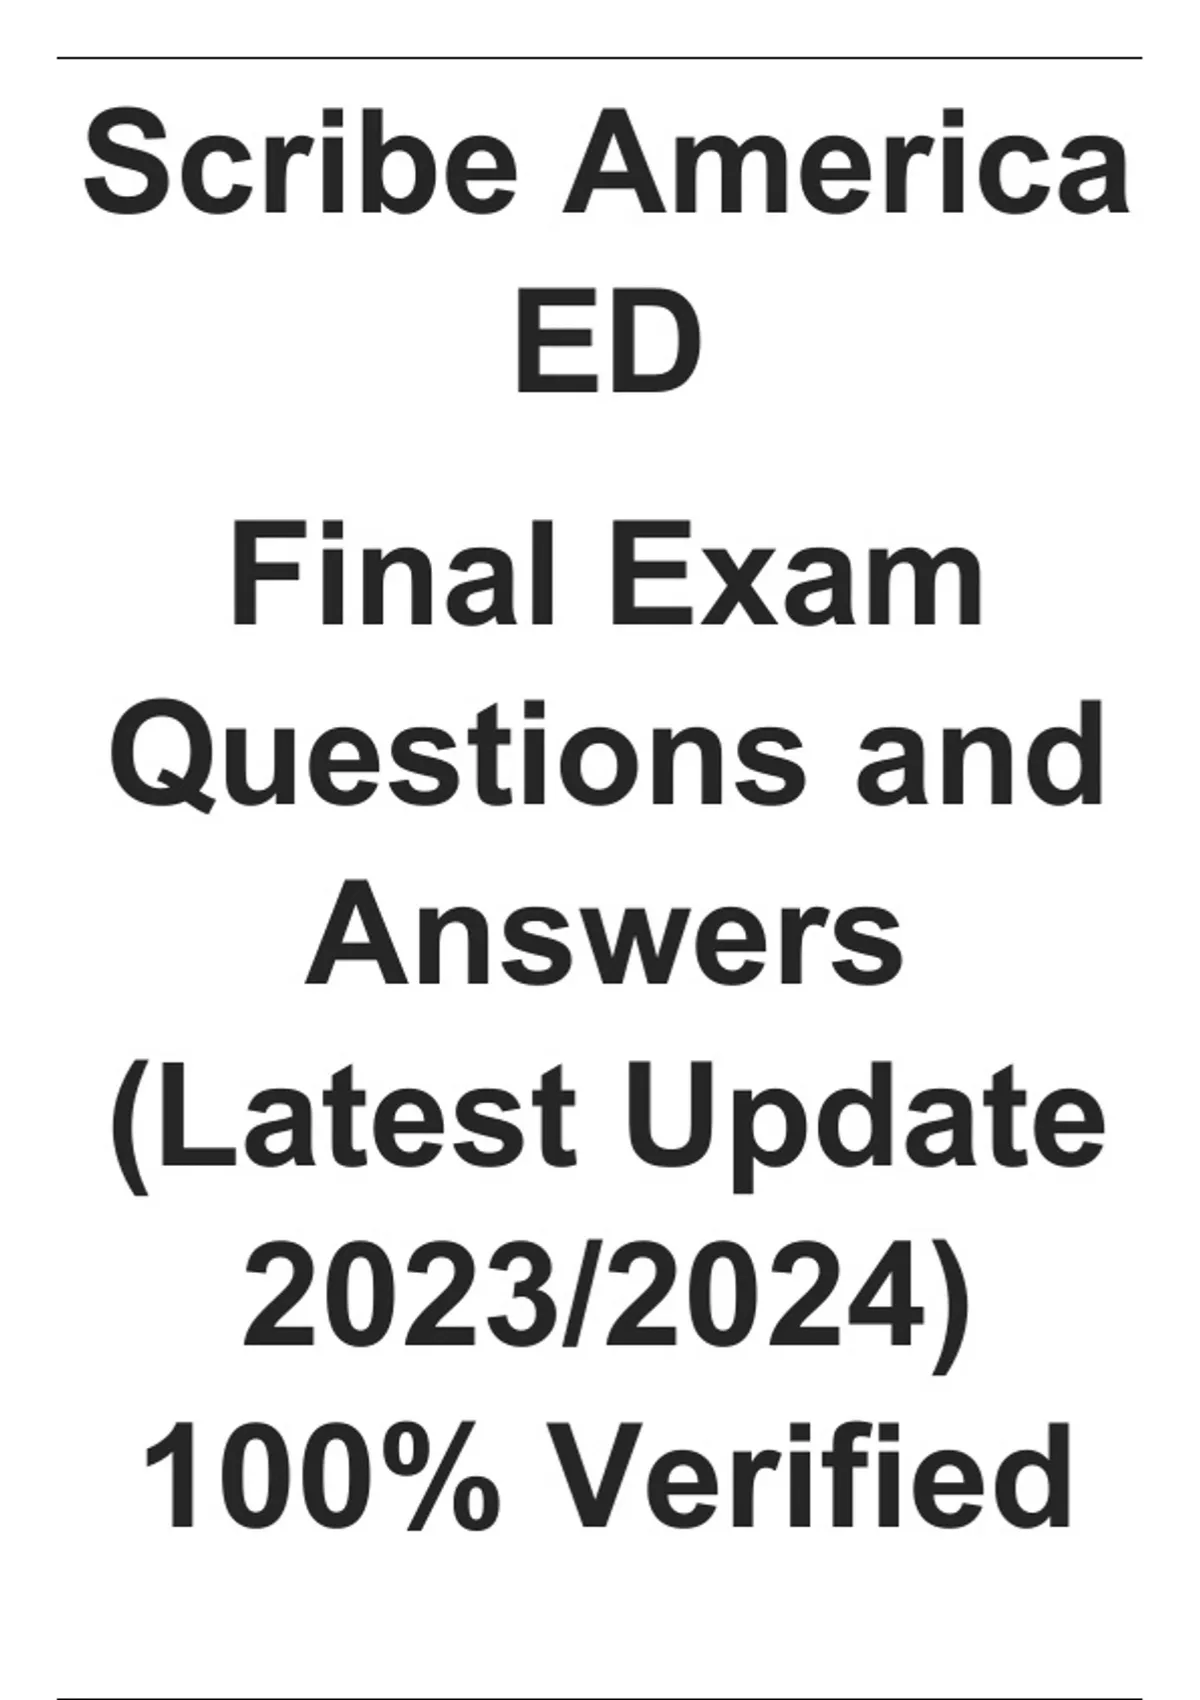 Scribe America ED Final Exam Questions and Answers (Latest Update 2023